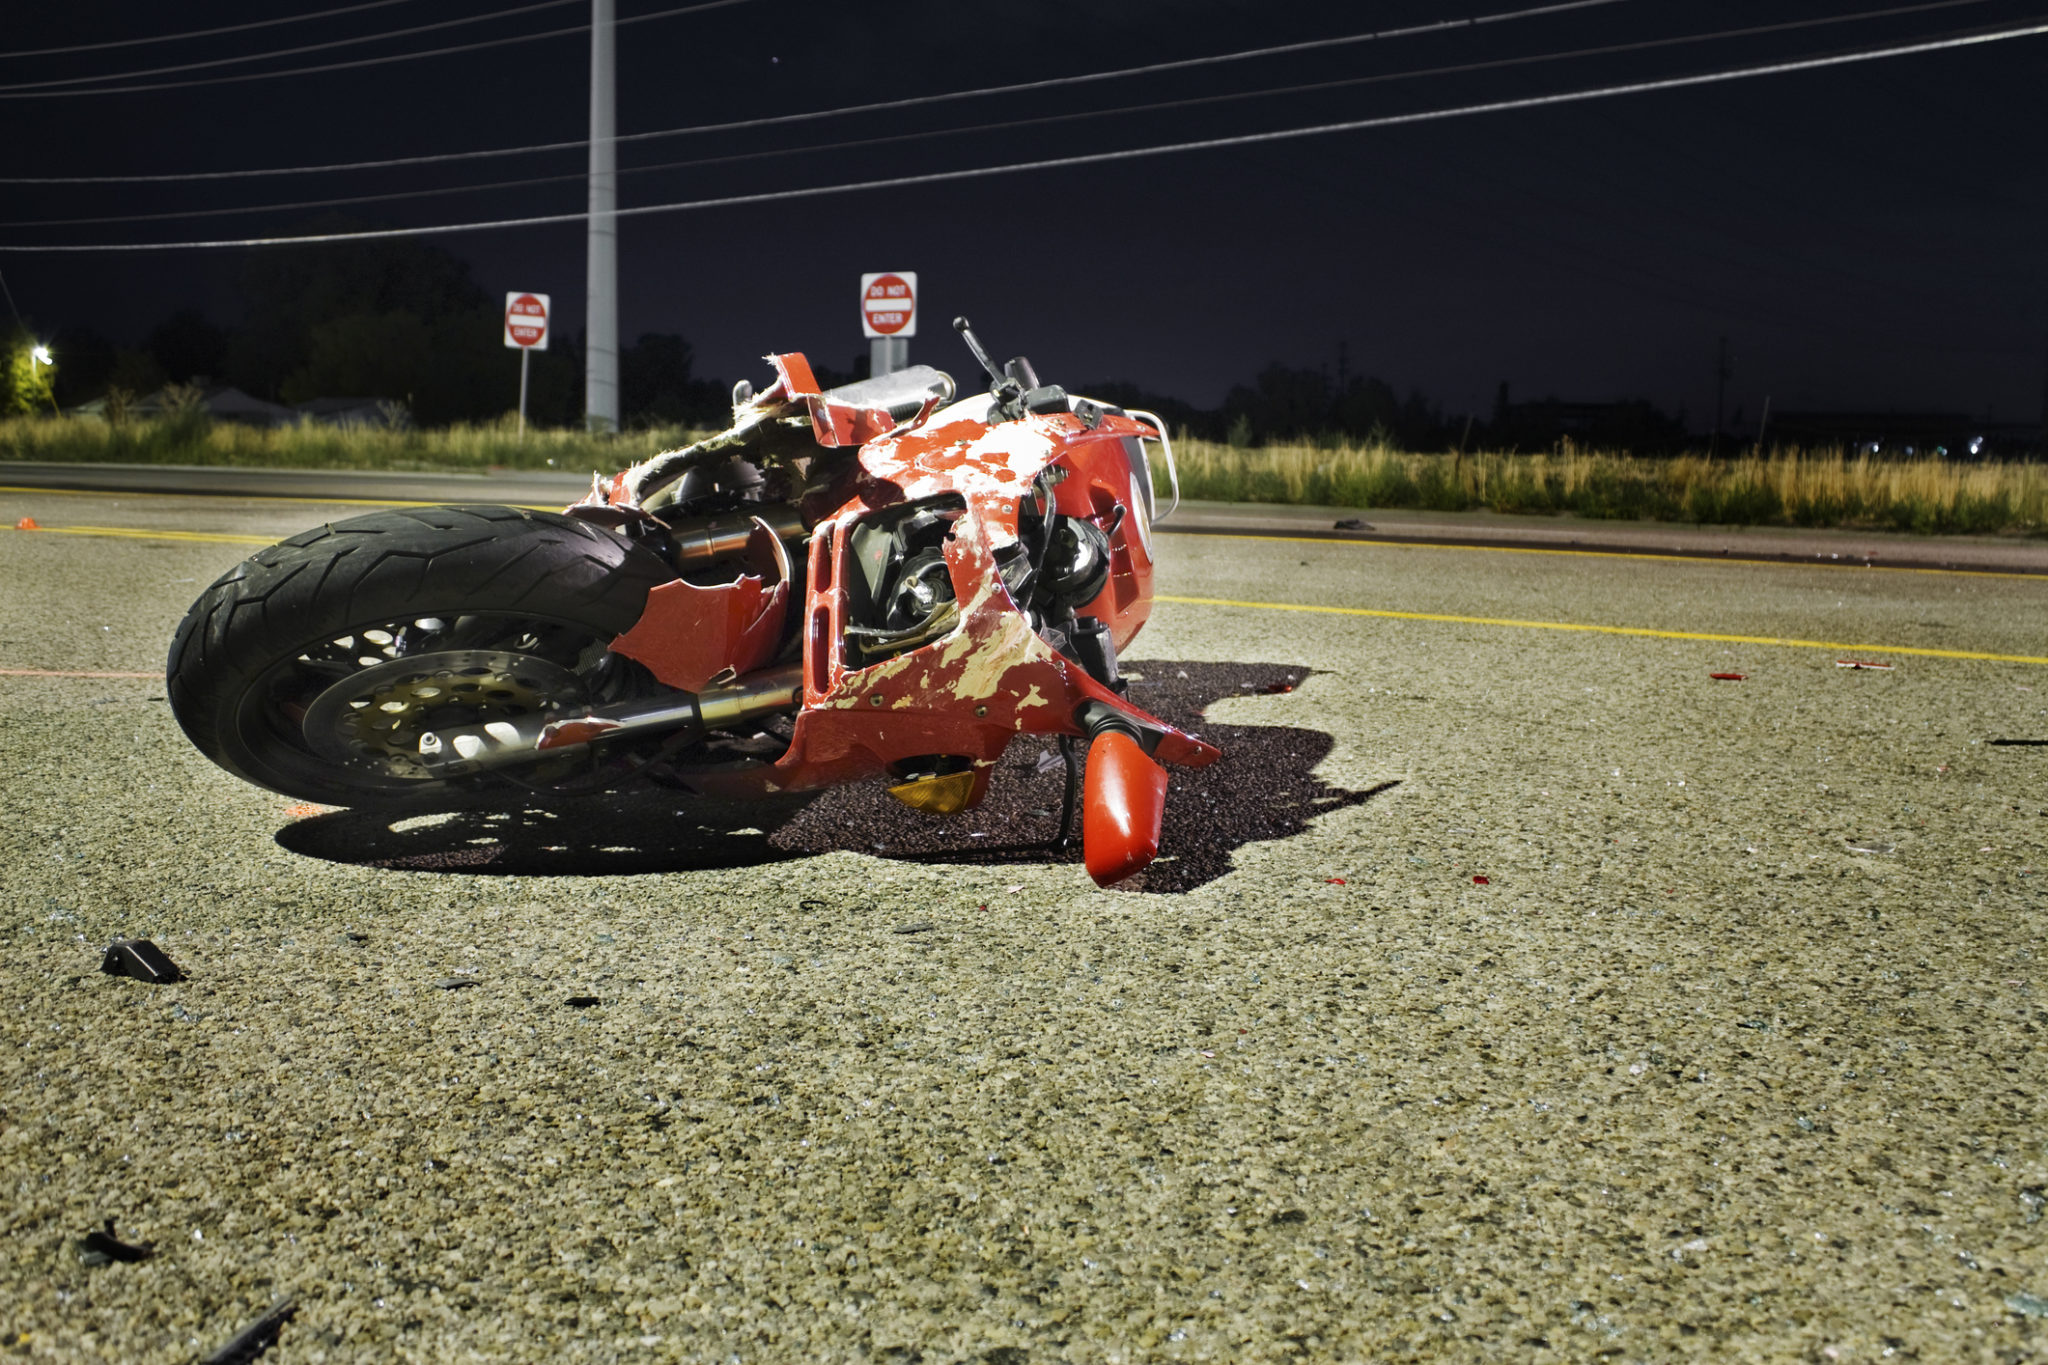 A San Bernardino Motorcycle Accident Lawyer Explains What to Do After a